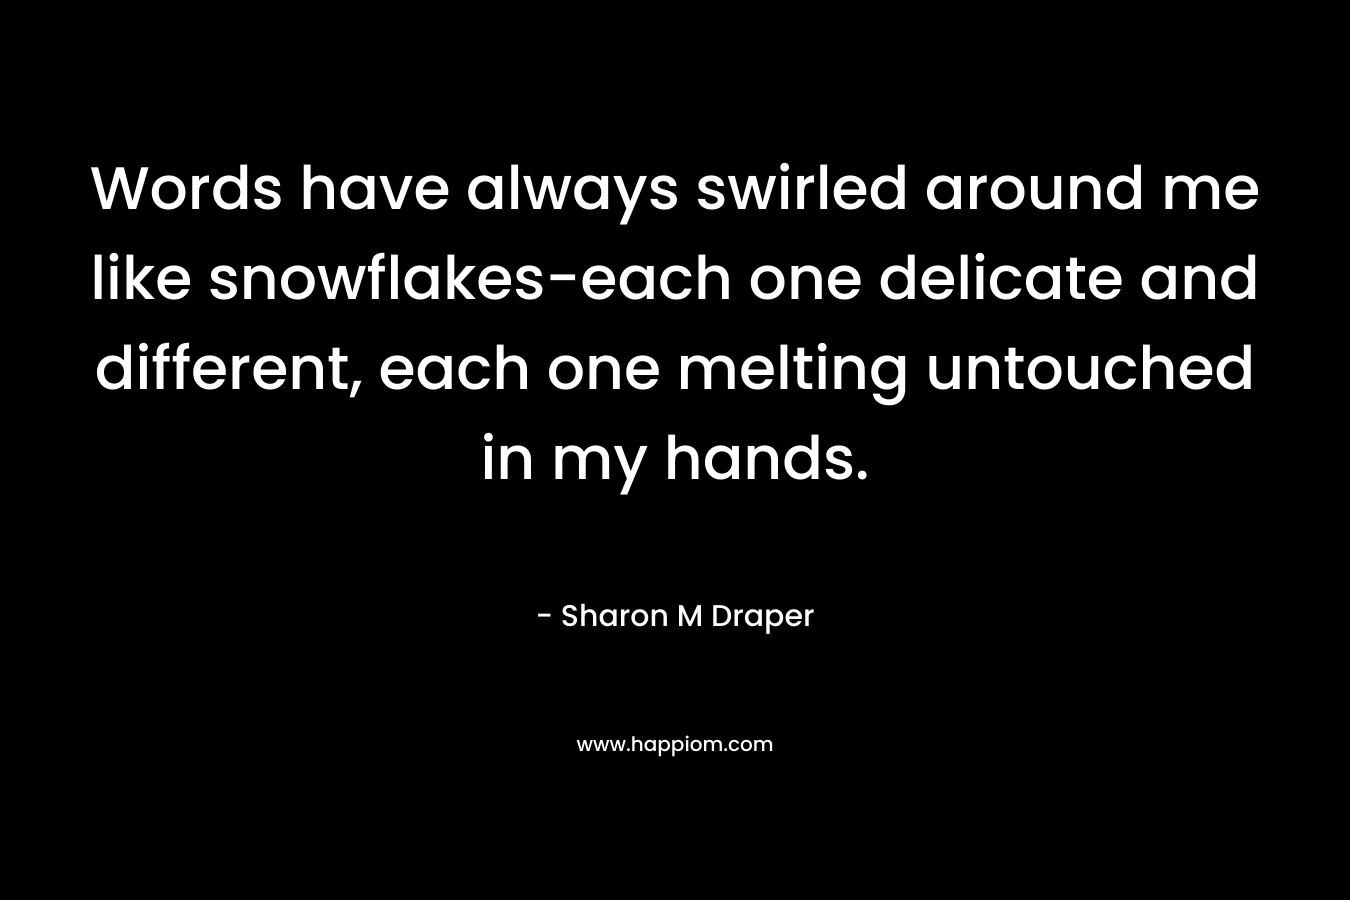 Words have always swirled around me like snowflakes-each one delicate and different, each one melting untouched in my hands. – Sharon M Draper